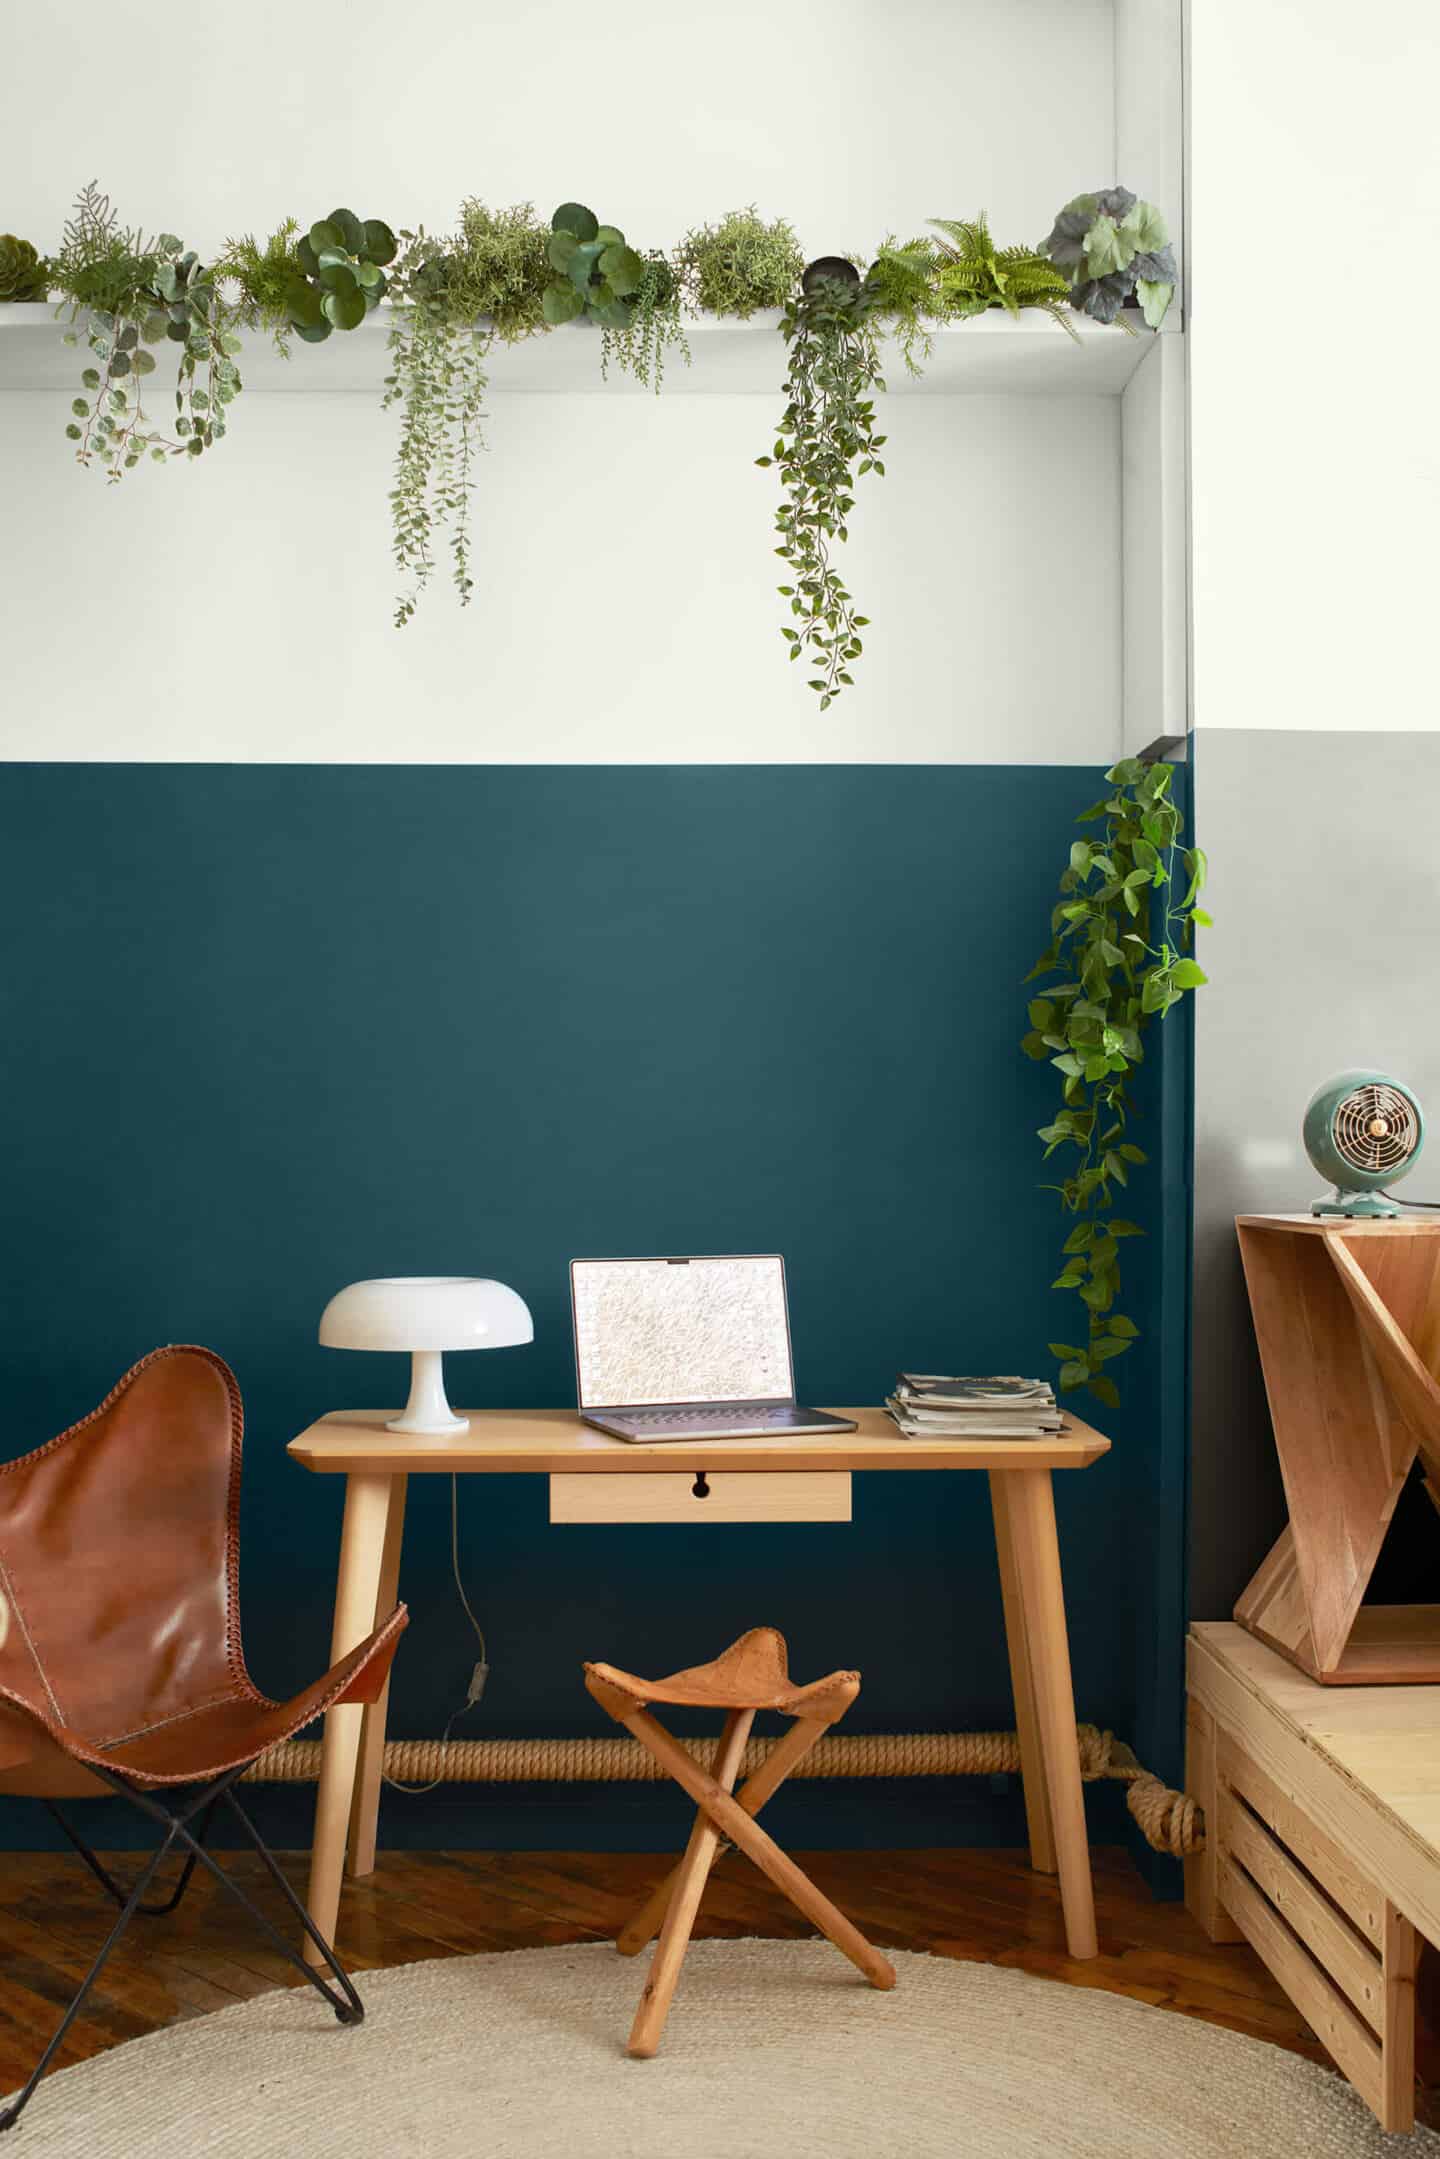 A wooden desk and stool in front of a blue wall in Benjamin Moore paint makes for a productive home office